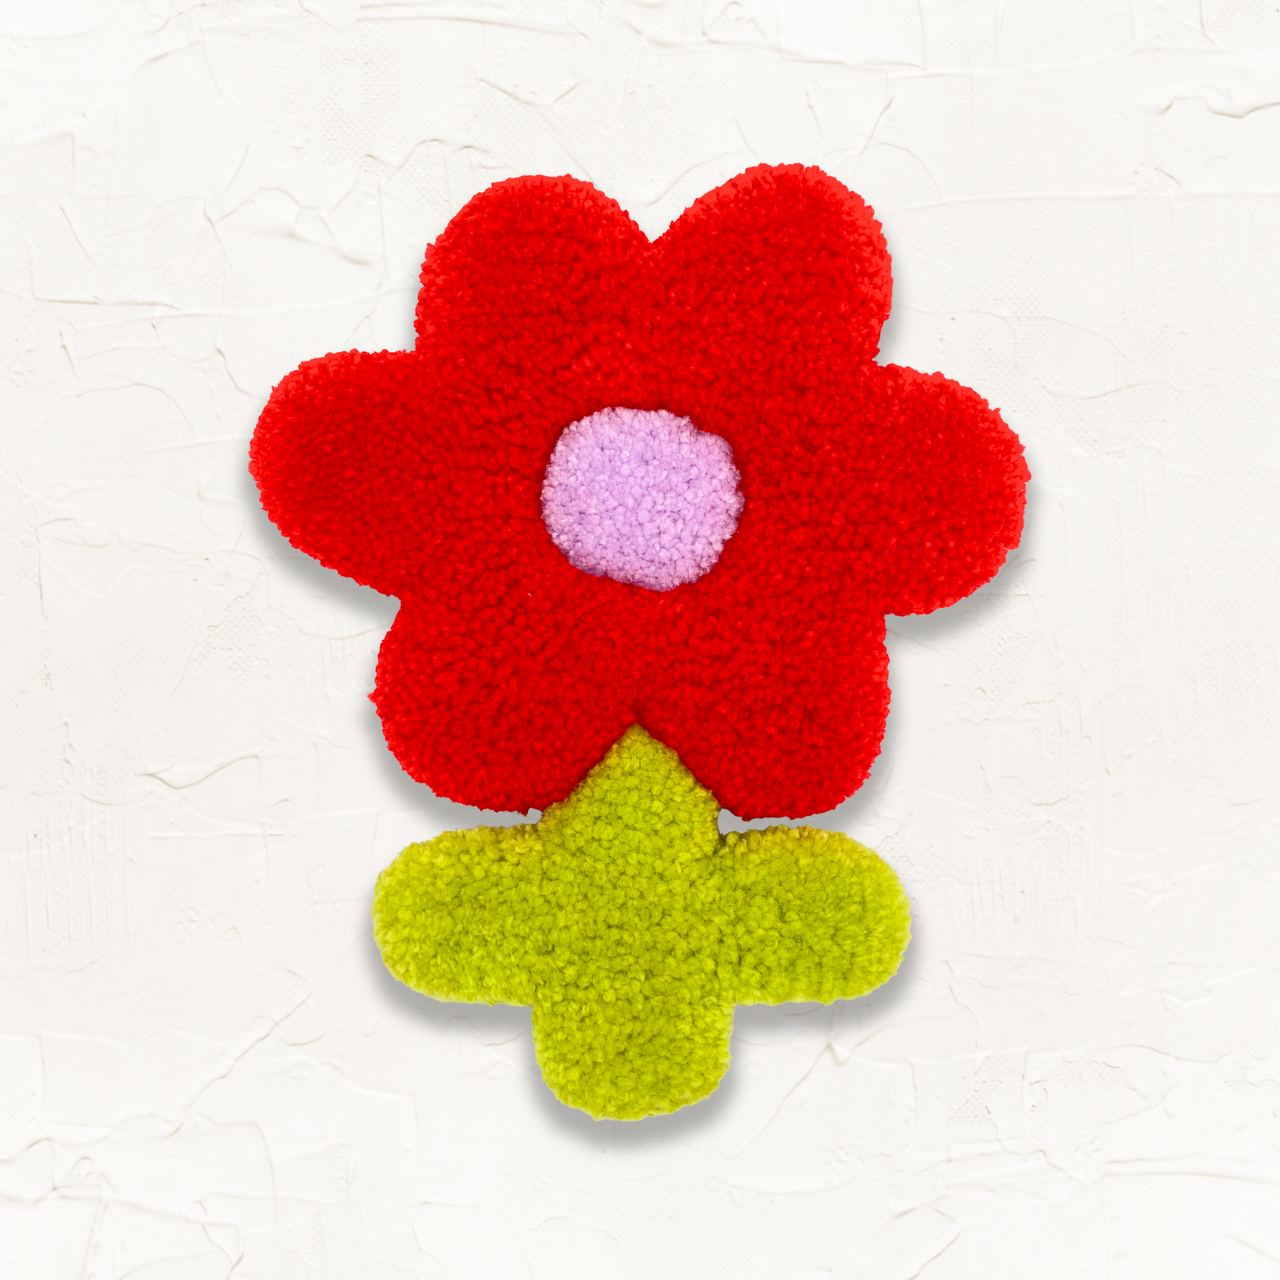 Flower Power Wall Rug - Red